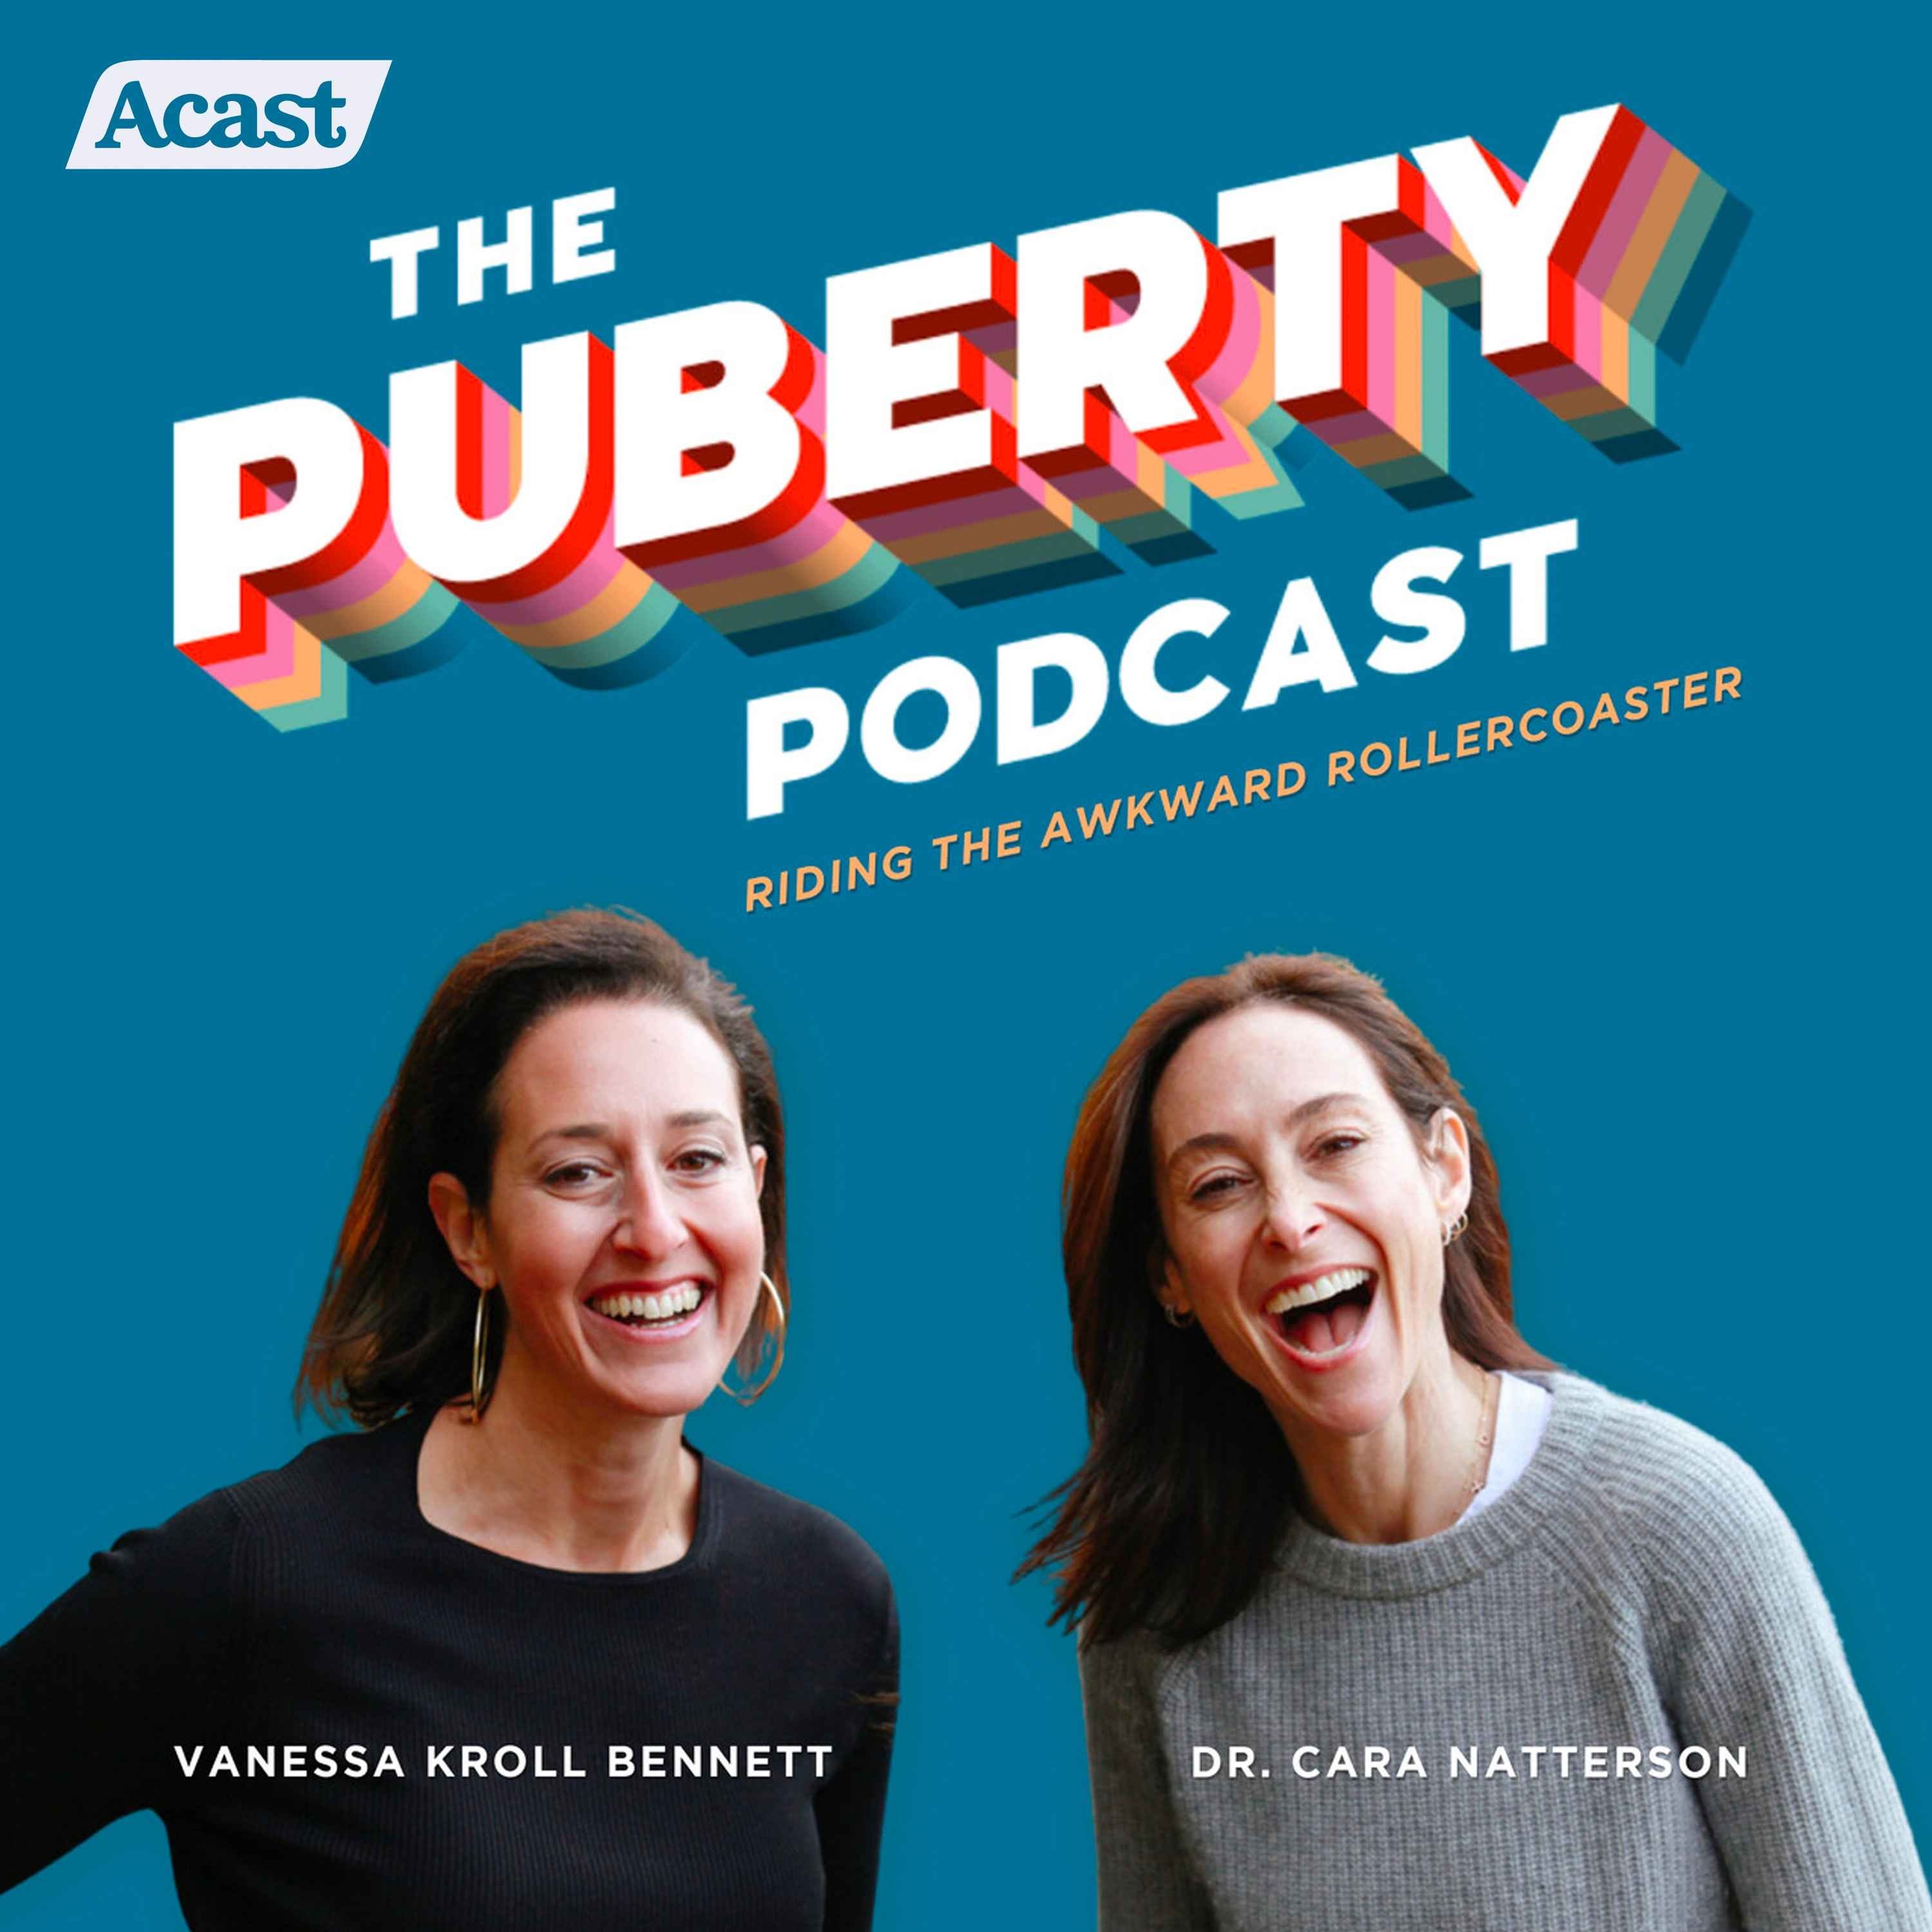 The Puberty Podcast:Peoples Media, The Puberty Podcast